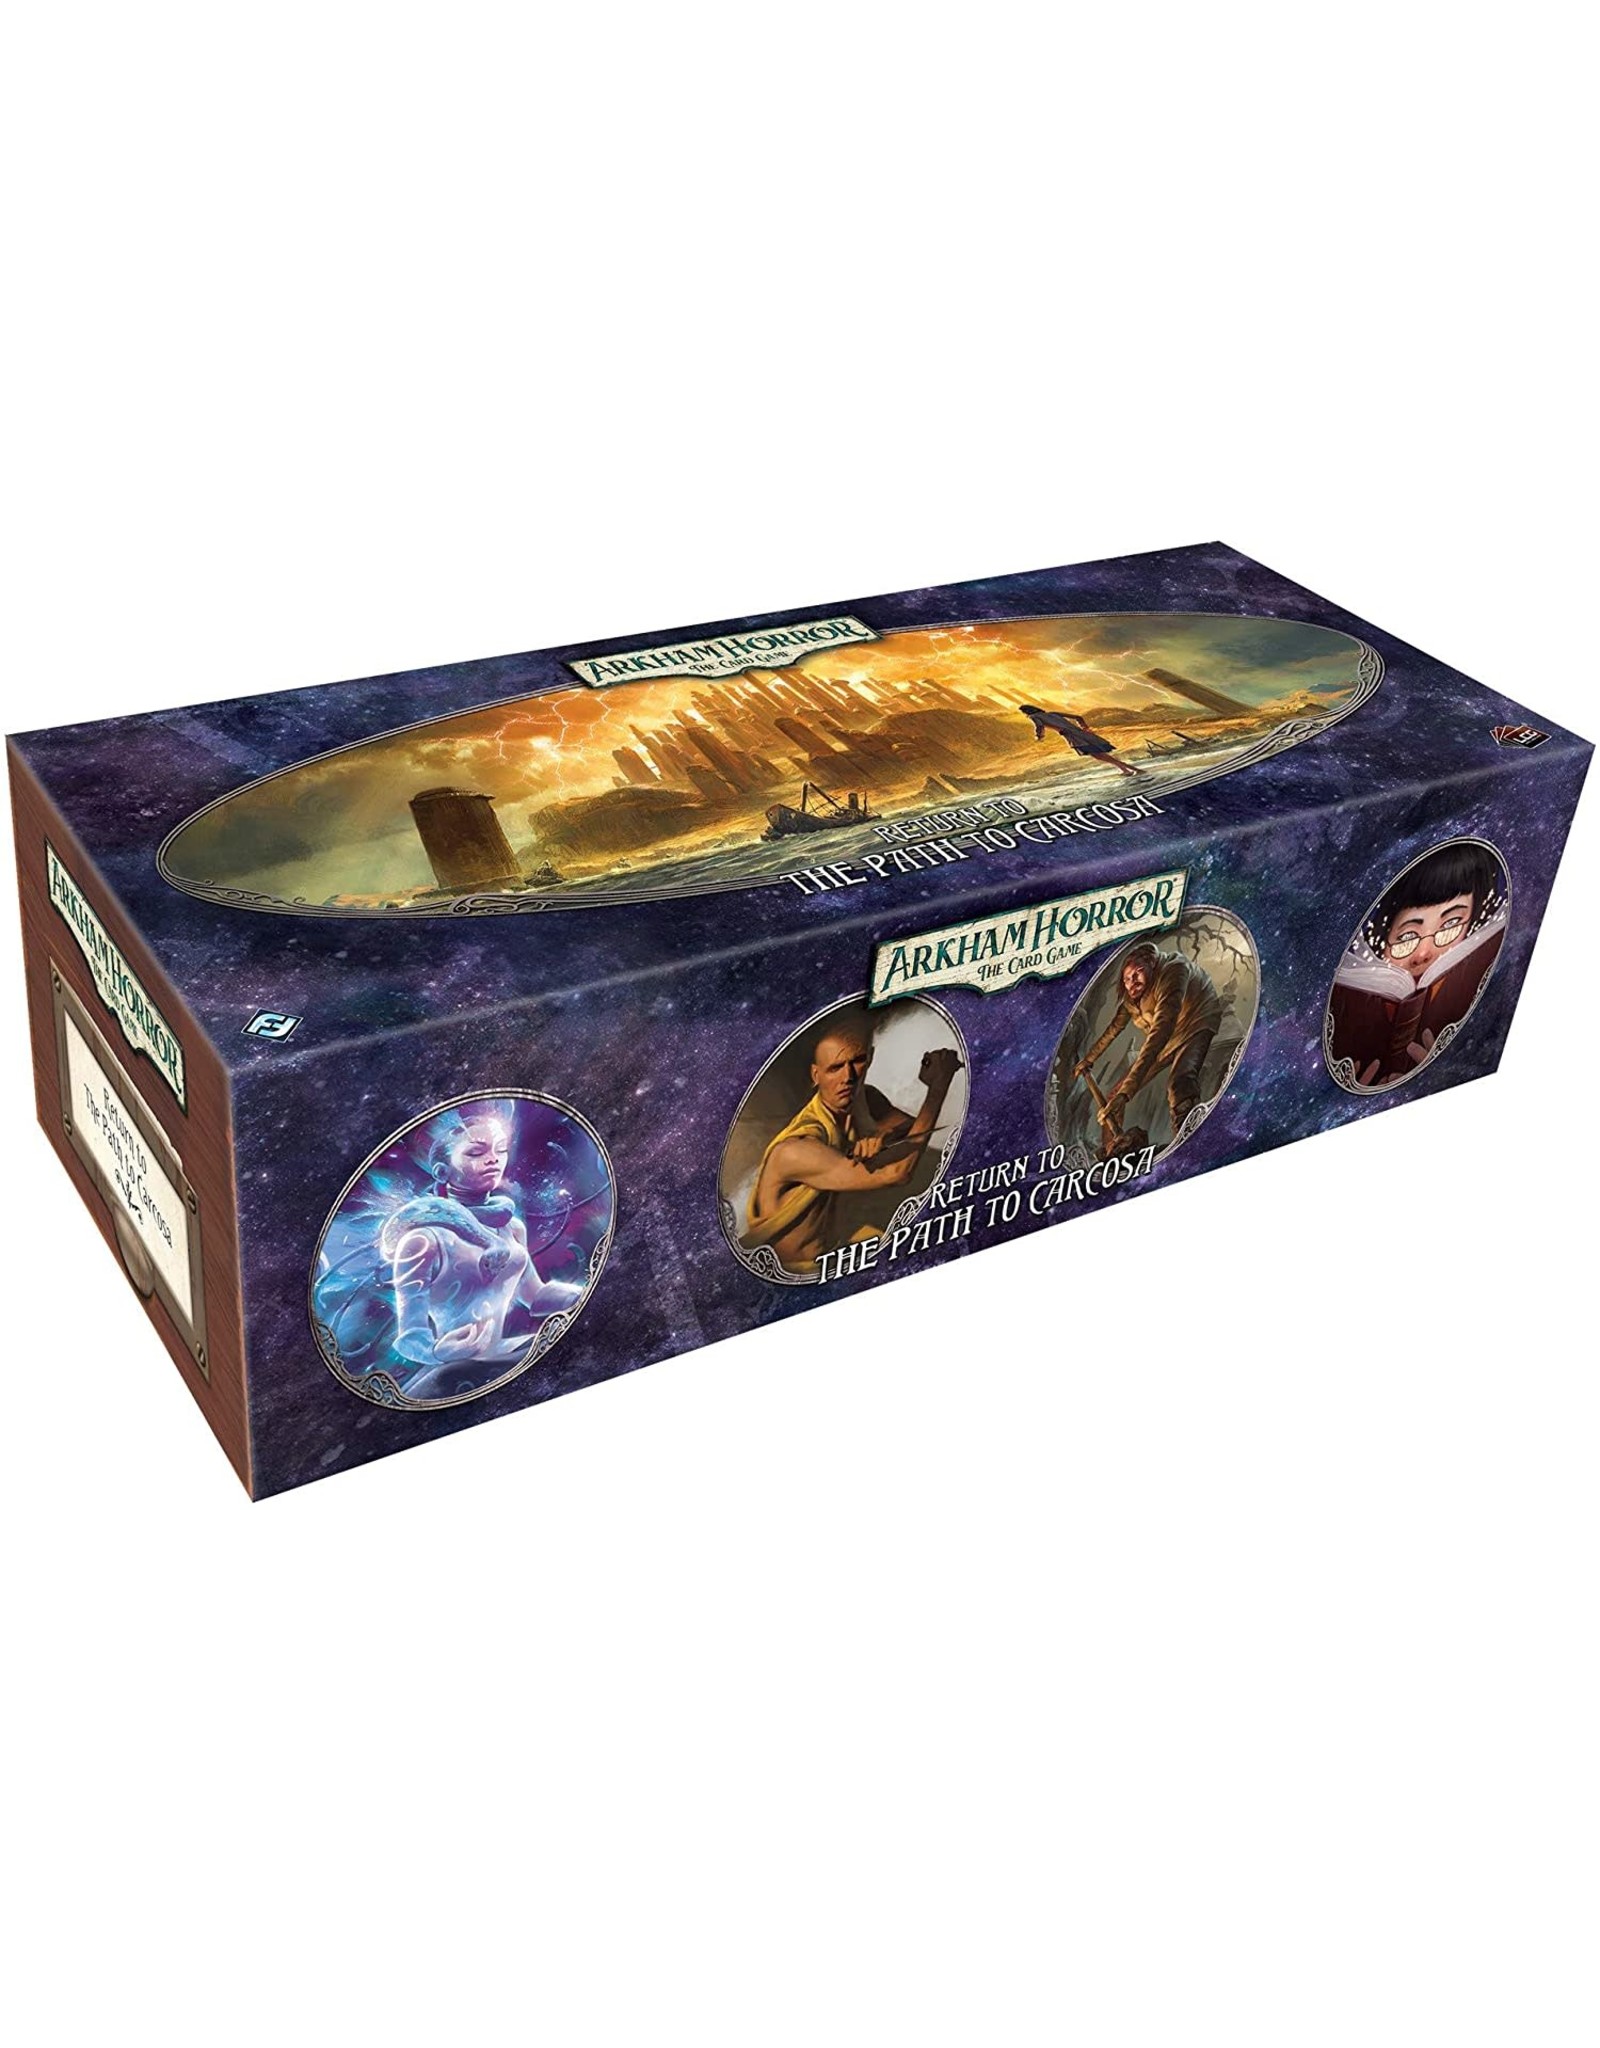 Fantasy Flight Games Arkham Horror LCG: Return to The Path to Carcosa Expansion